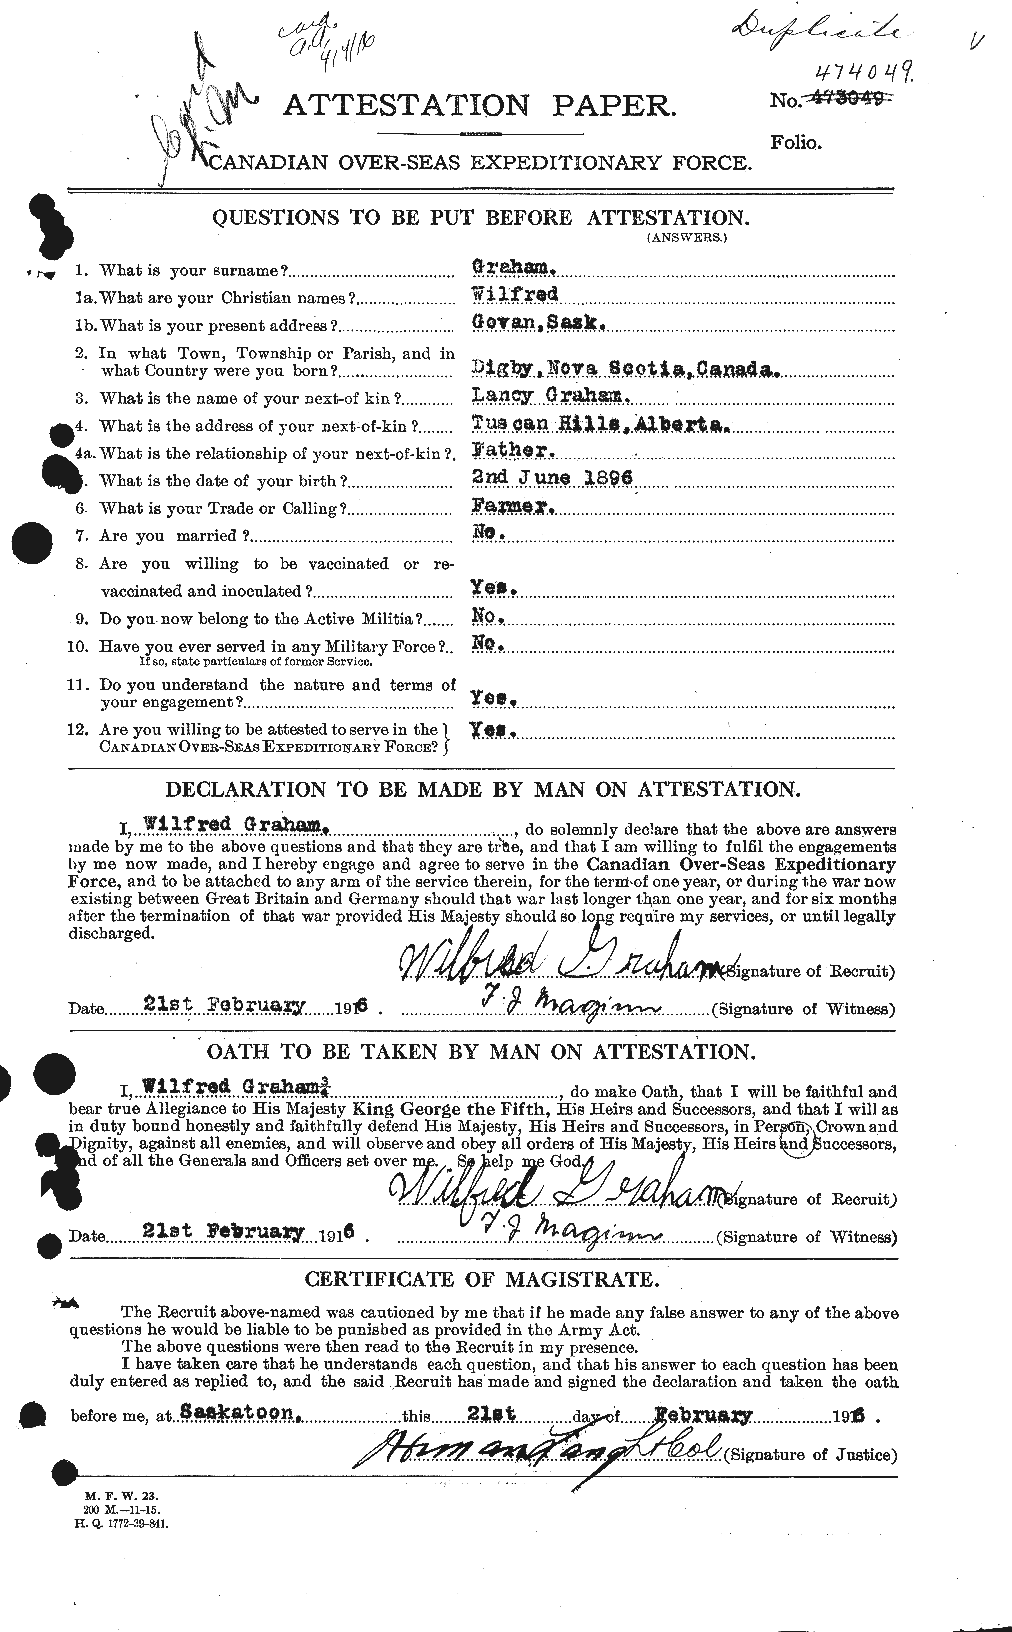 Personnel Records of the First World War - CEF 362671a